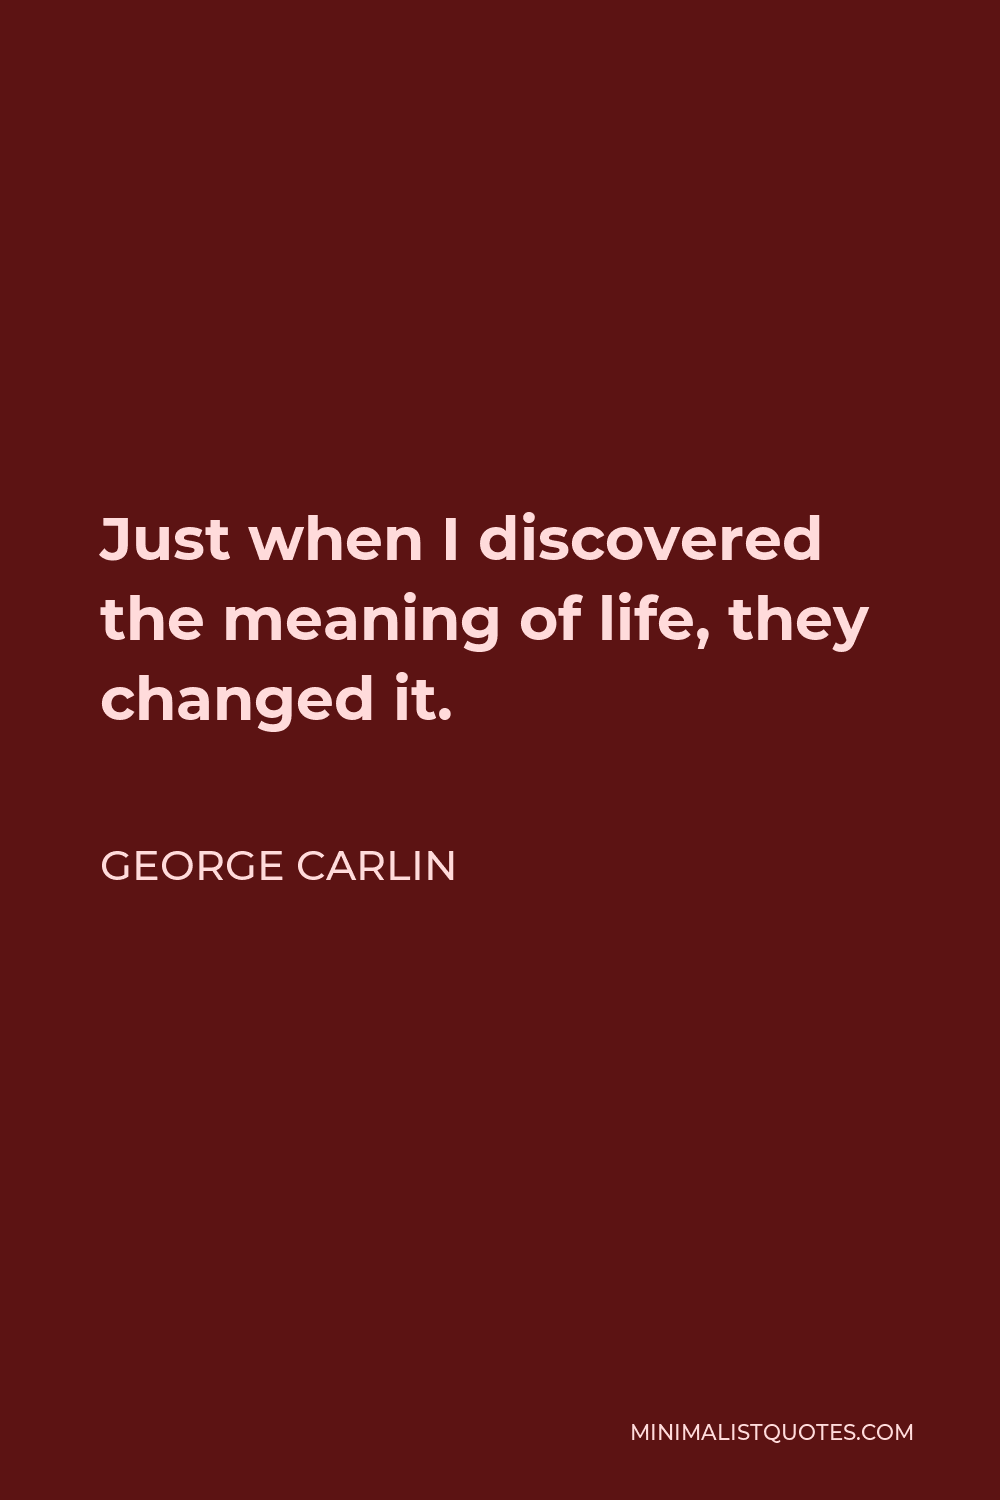 George Carlin Quote - Just when I discovered the meaning of life, they changed it.